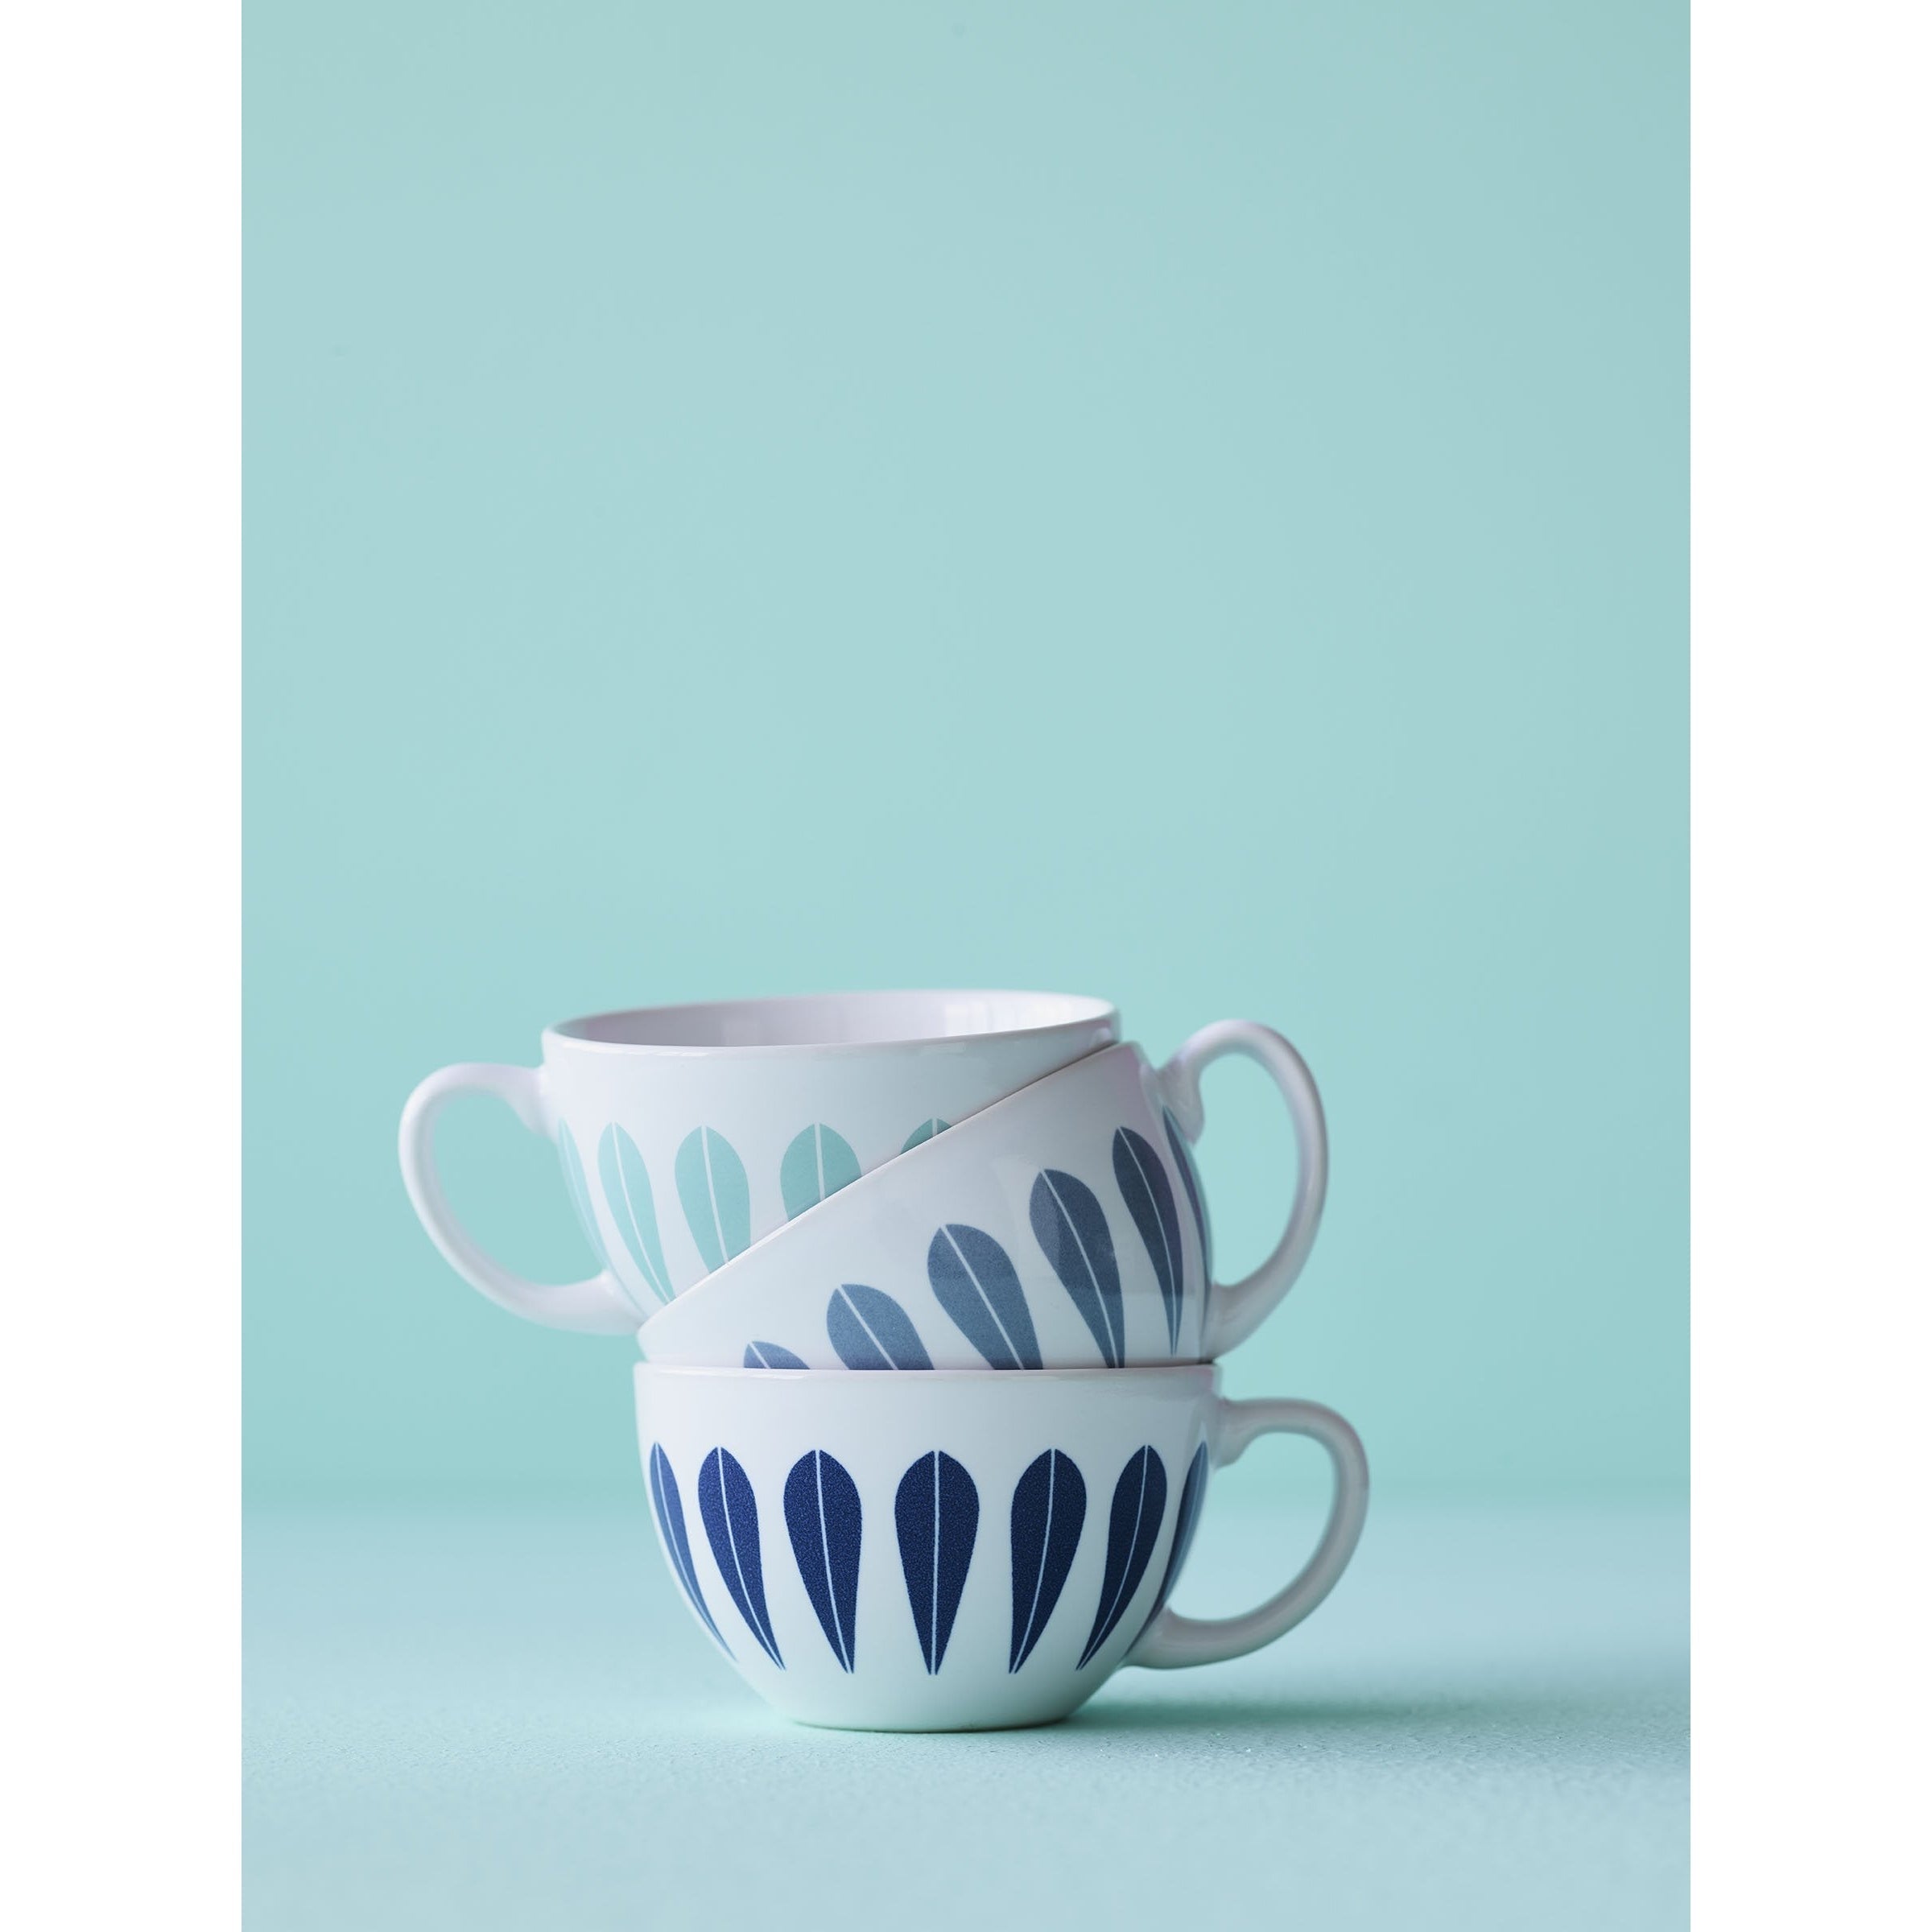 Lucie Kaas Arne Clausen Collection Cups W. Saucer Grey, 10cm